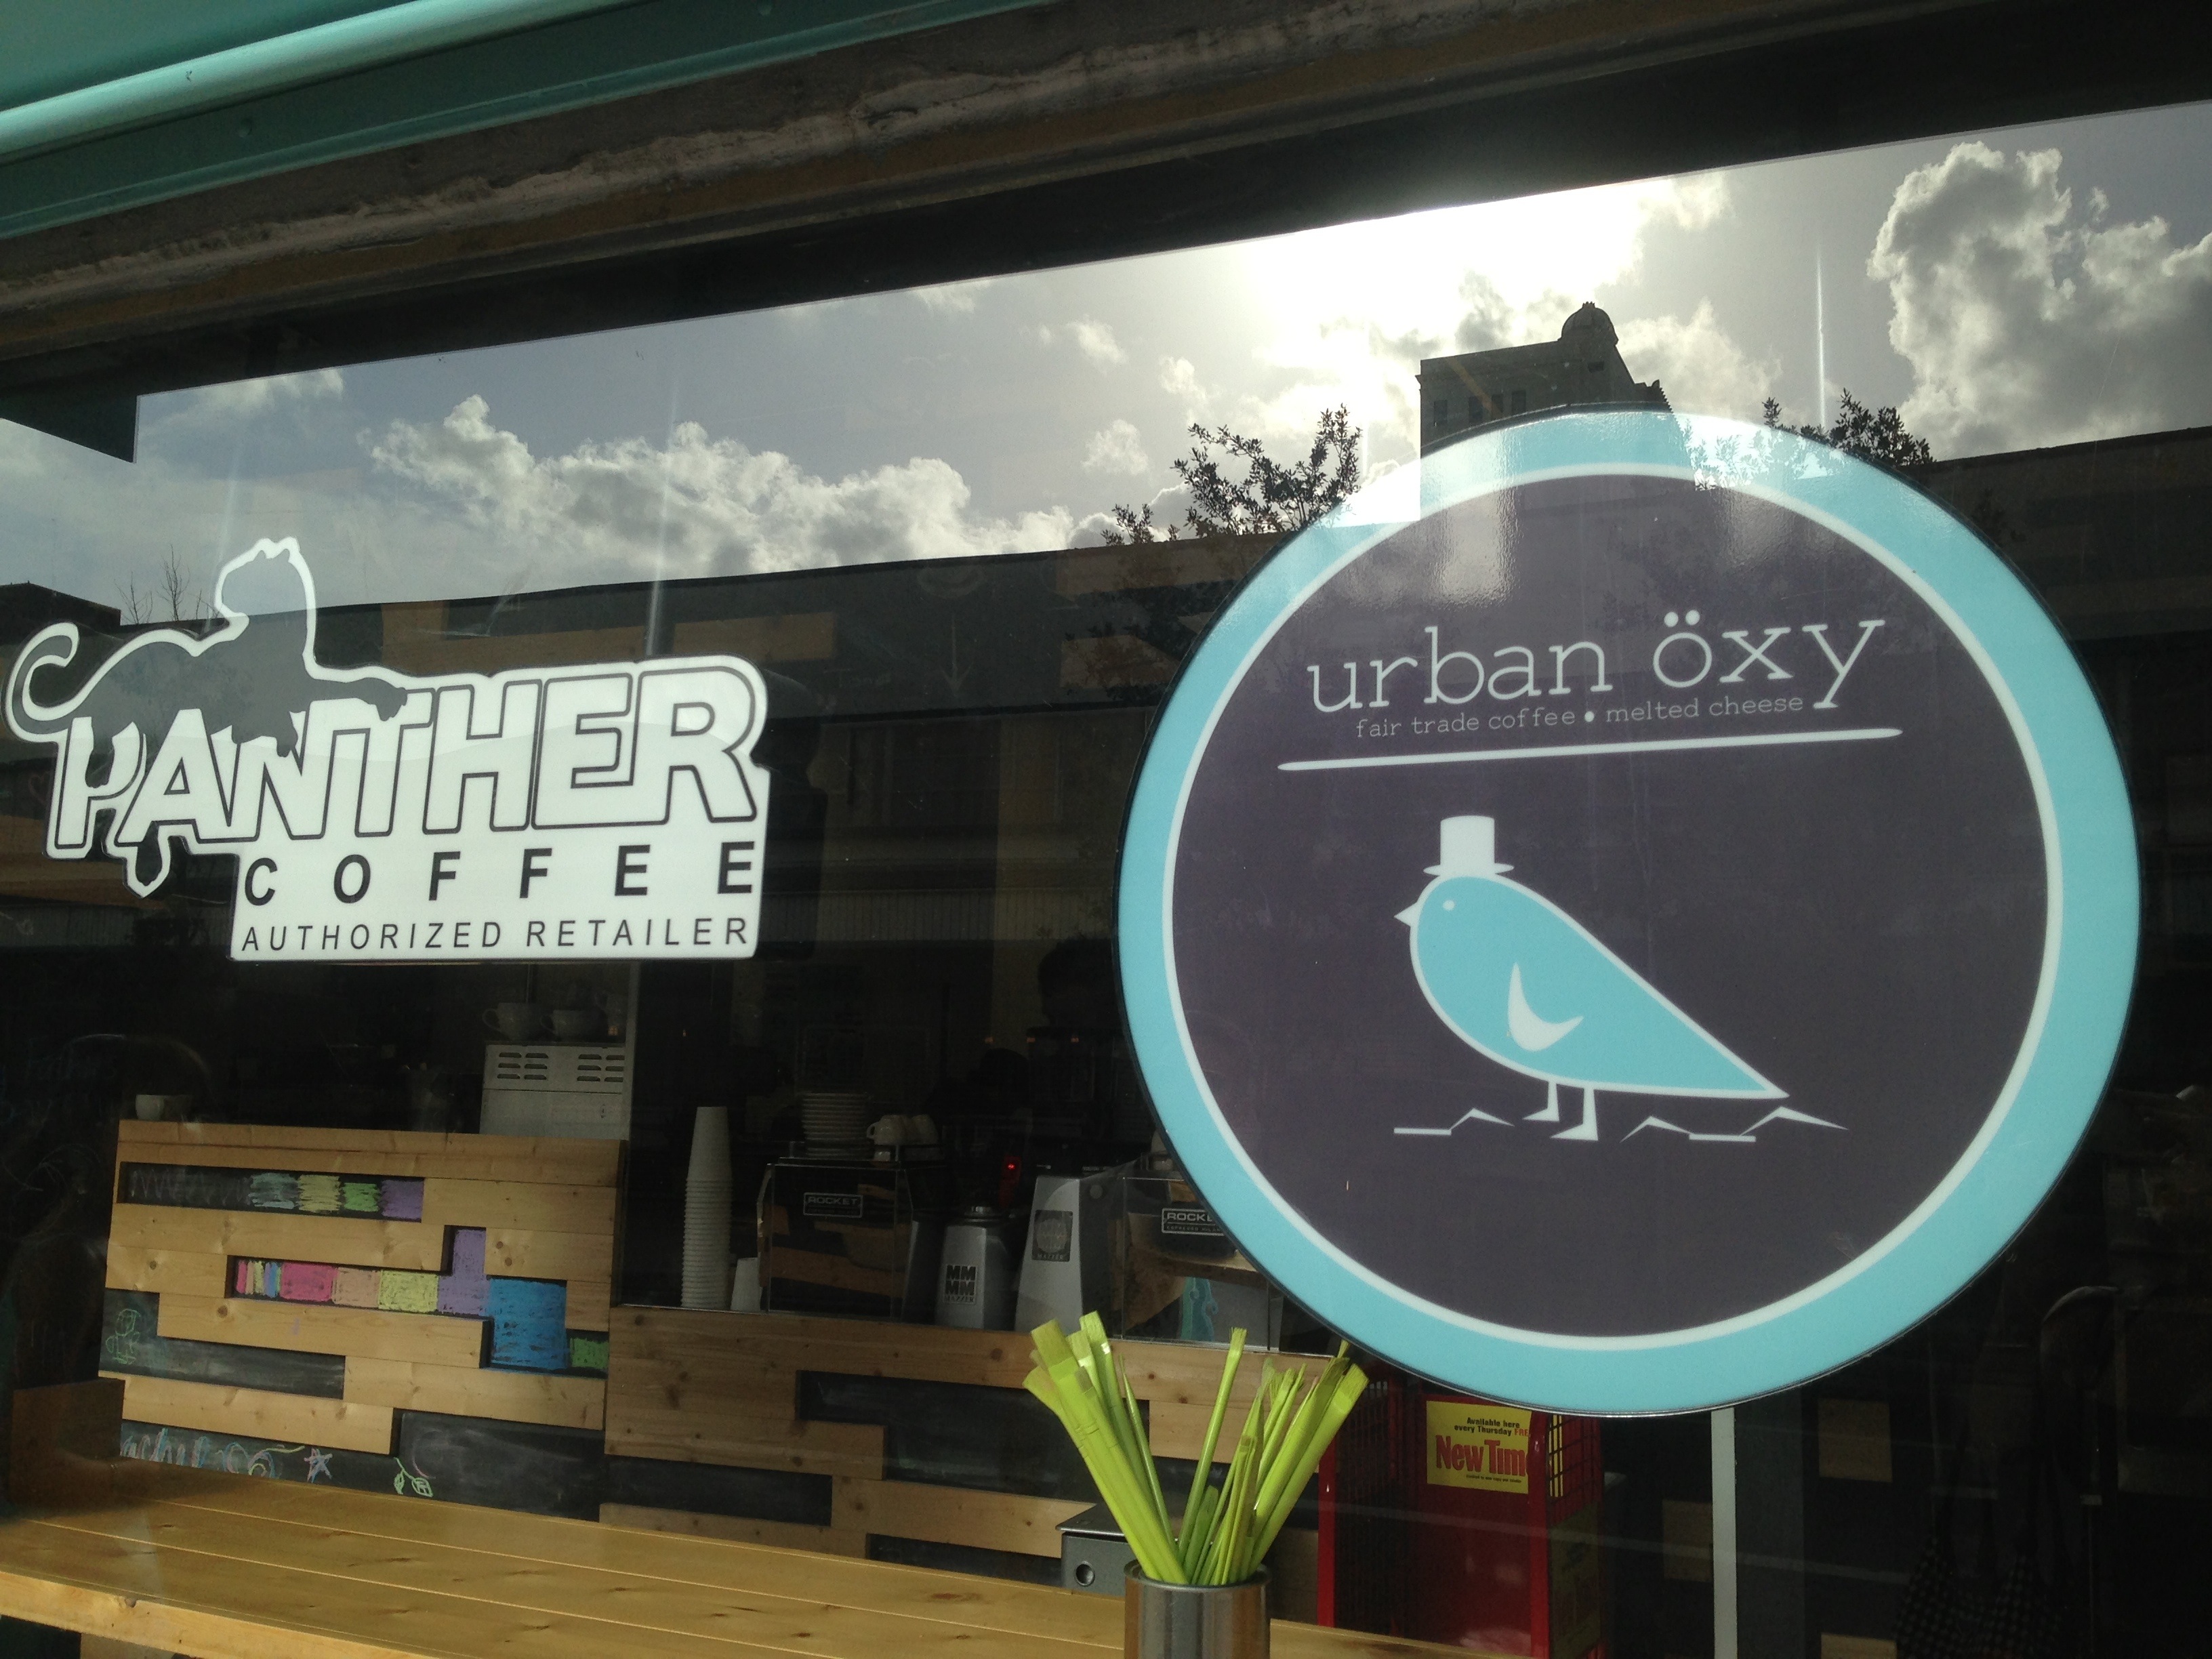 The Urban Oxy serves Panther coffee, a Miami based specialty coffee roaster 